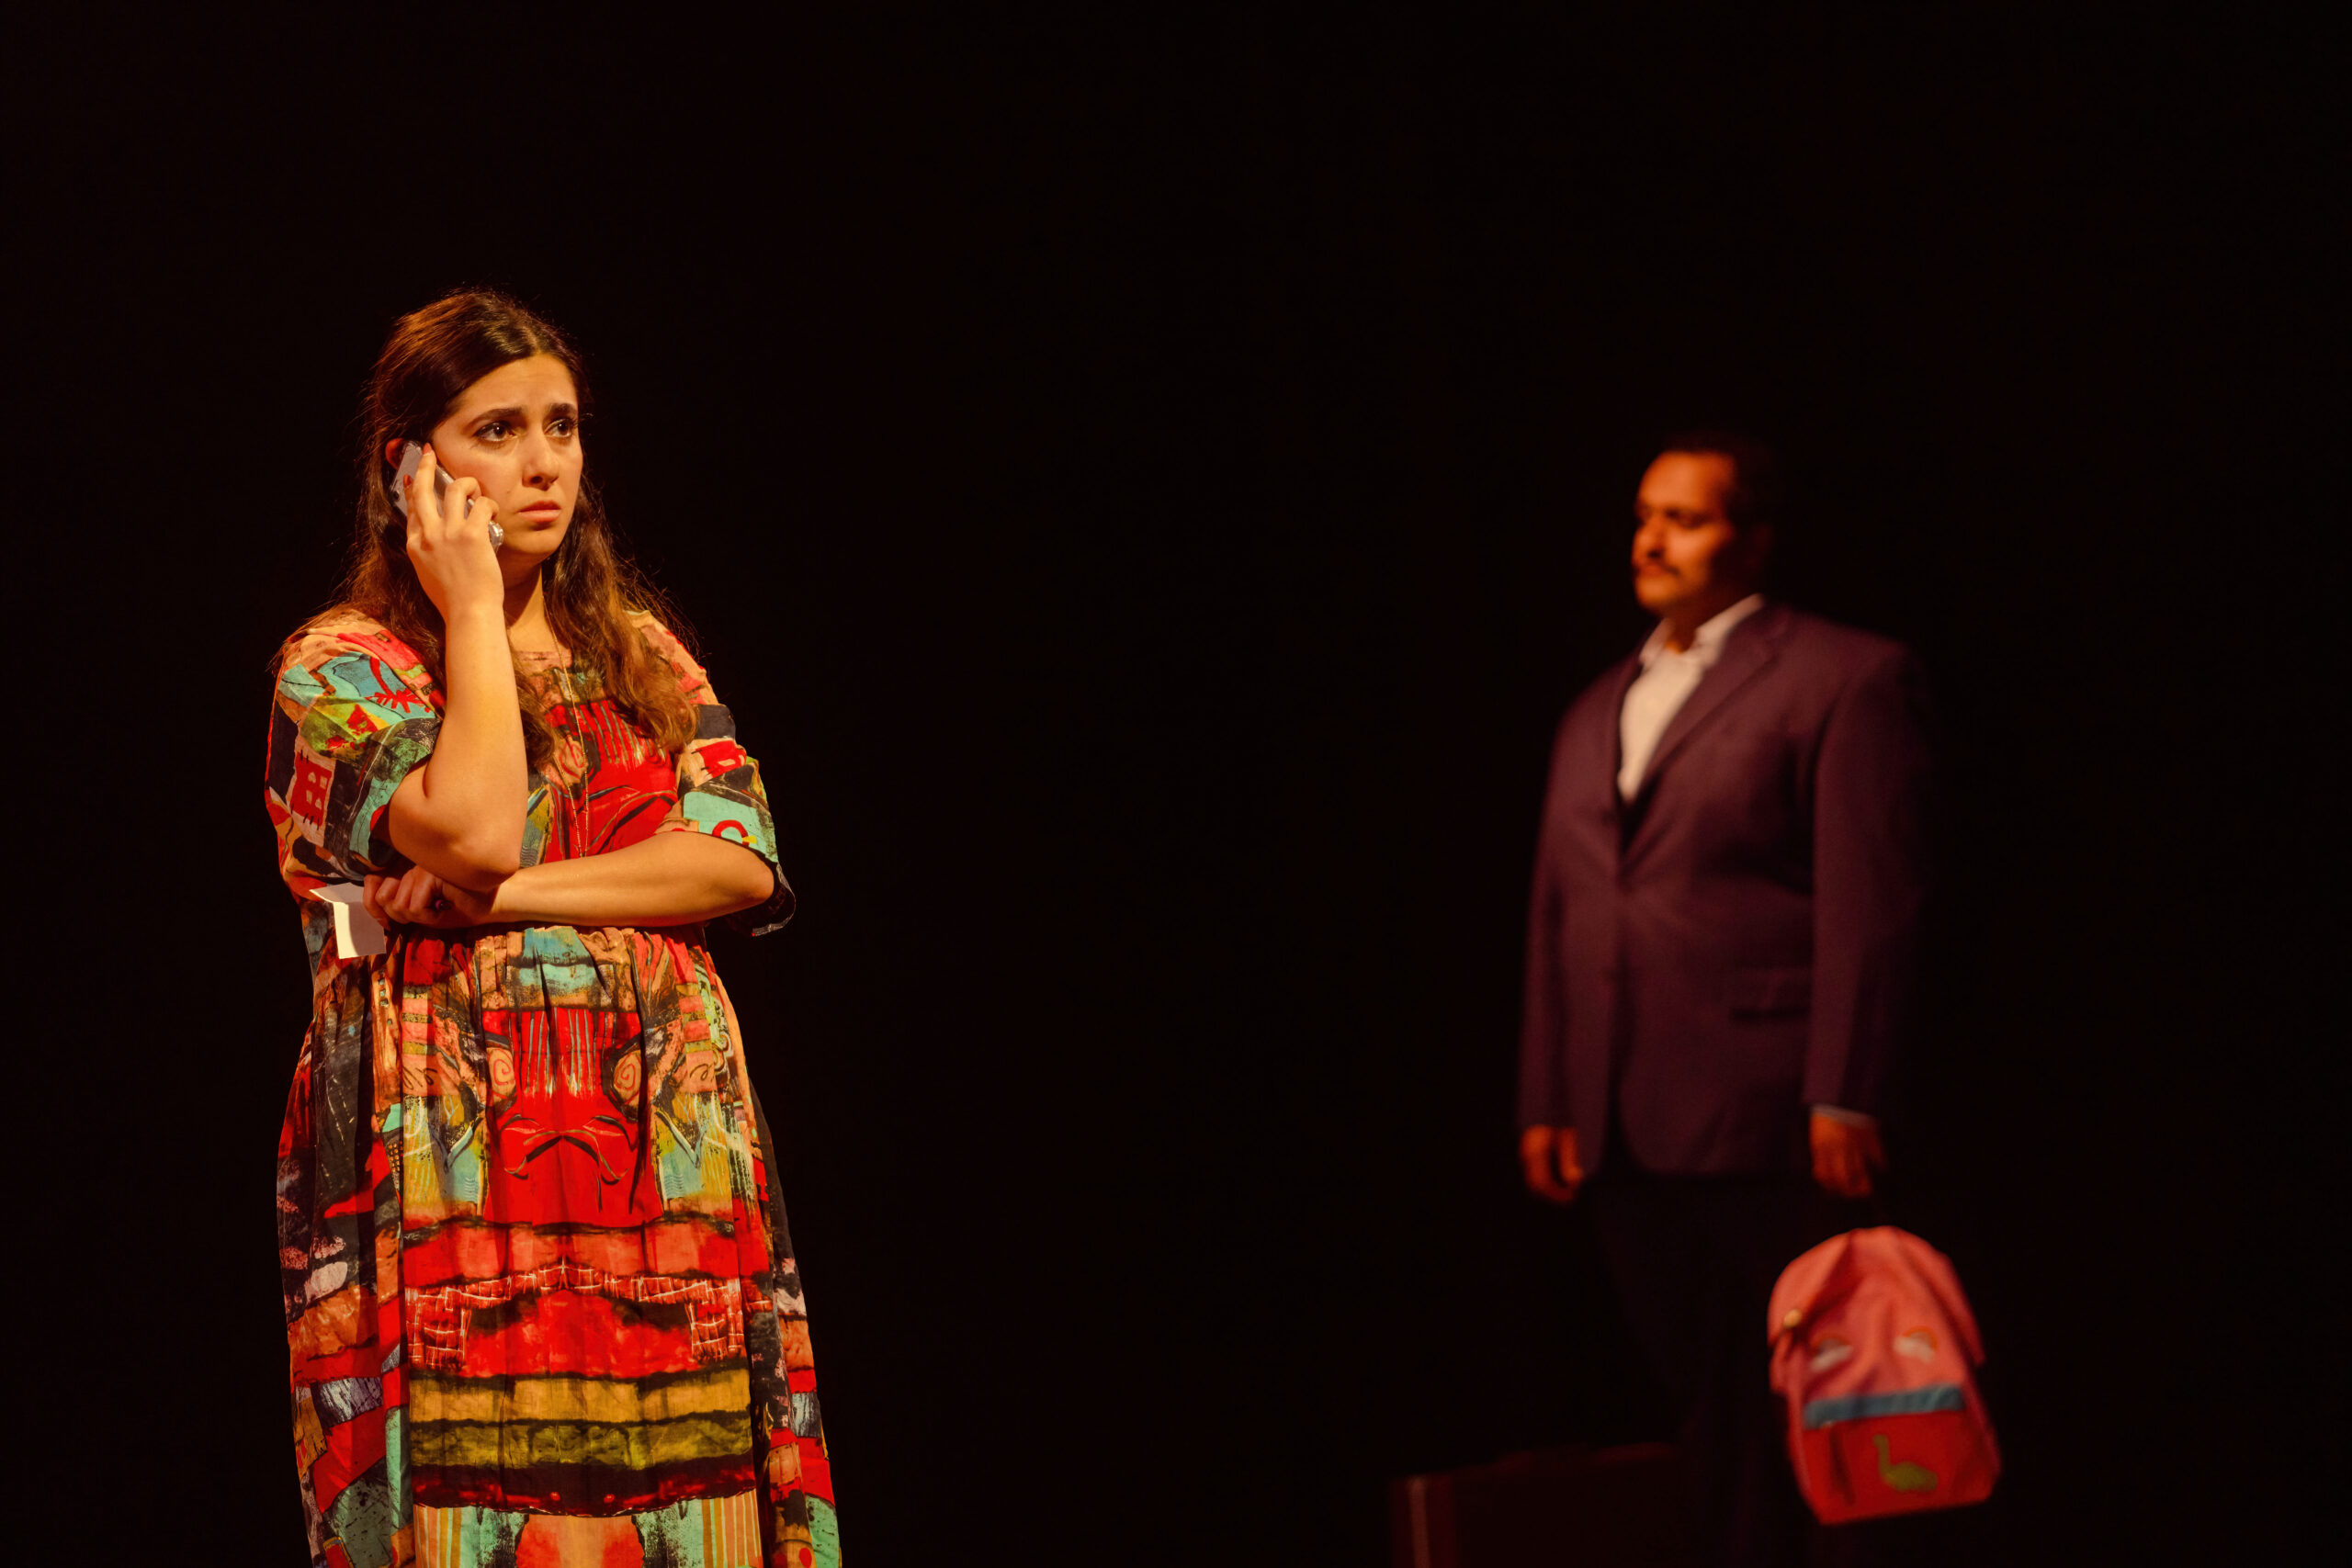 Mohammed (Ahmad Kamal) and Layal (Savannah Yasmine Elayyach) in BABA by Denmo Ibrahim, directed by Hamid Dehghani. Photo by Evan Michael Woods, provided by Amphibian Stage.